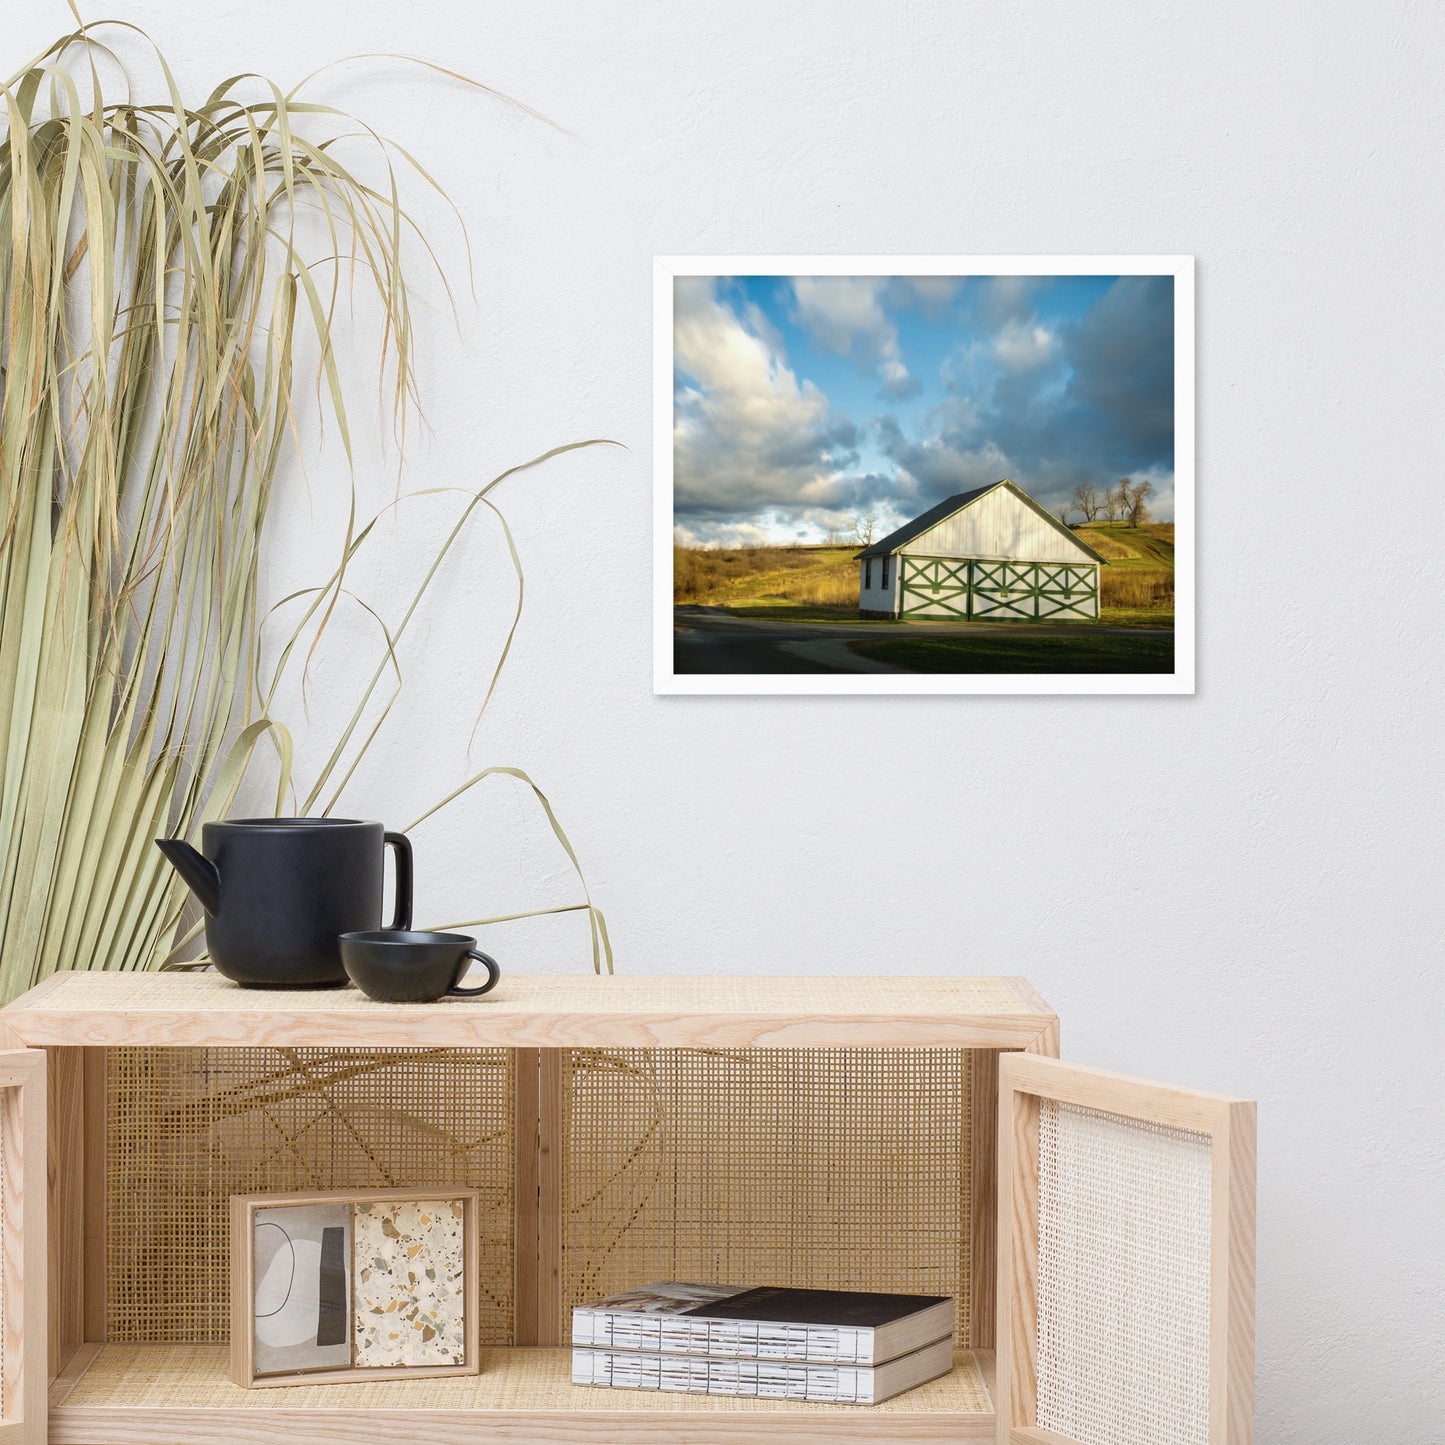 Pictures To Hang In Your Room: Aging Barn in the Morning Sun - Rural / Country Style Landscape / Nature Photograph  Framed Wall Art Print - Wall Decor - Artwork